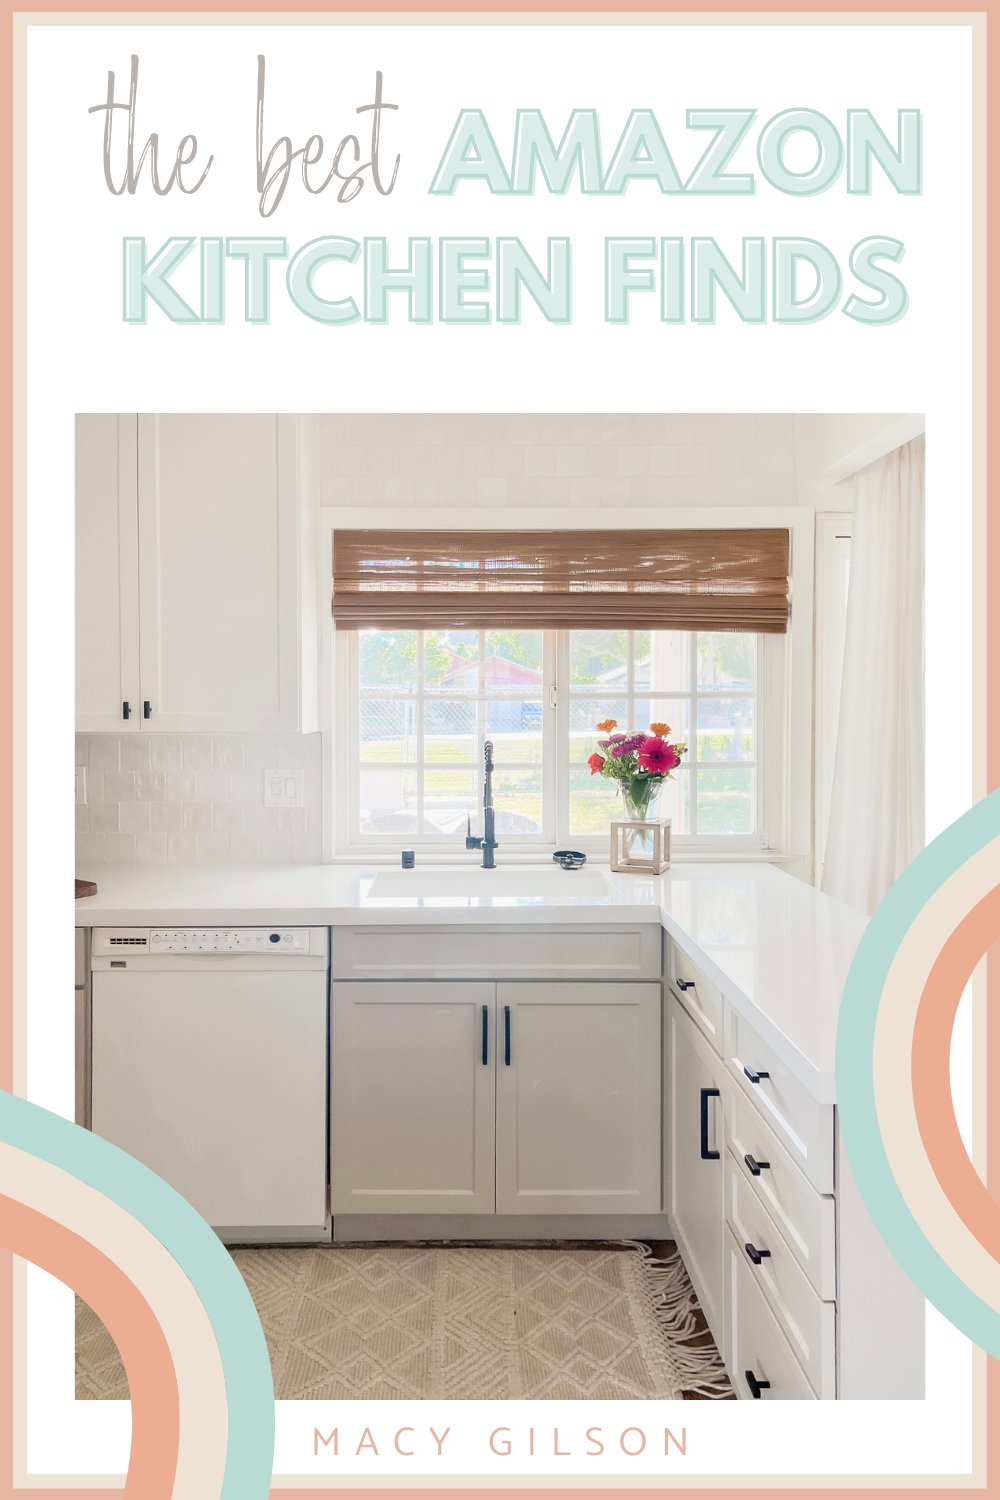 Best Kitchen Amazon Finds | Prime Day 2022 — Macy Gilson